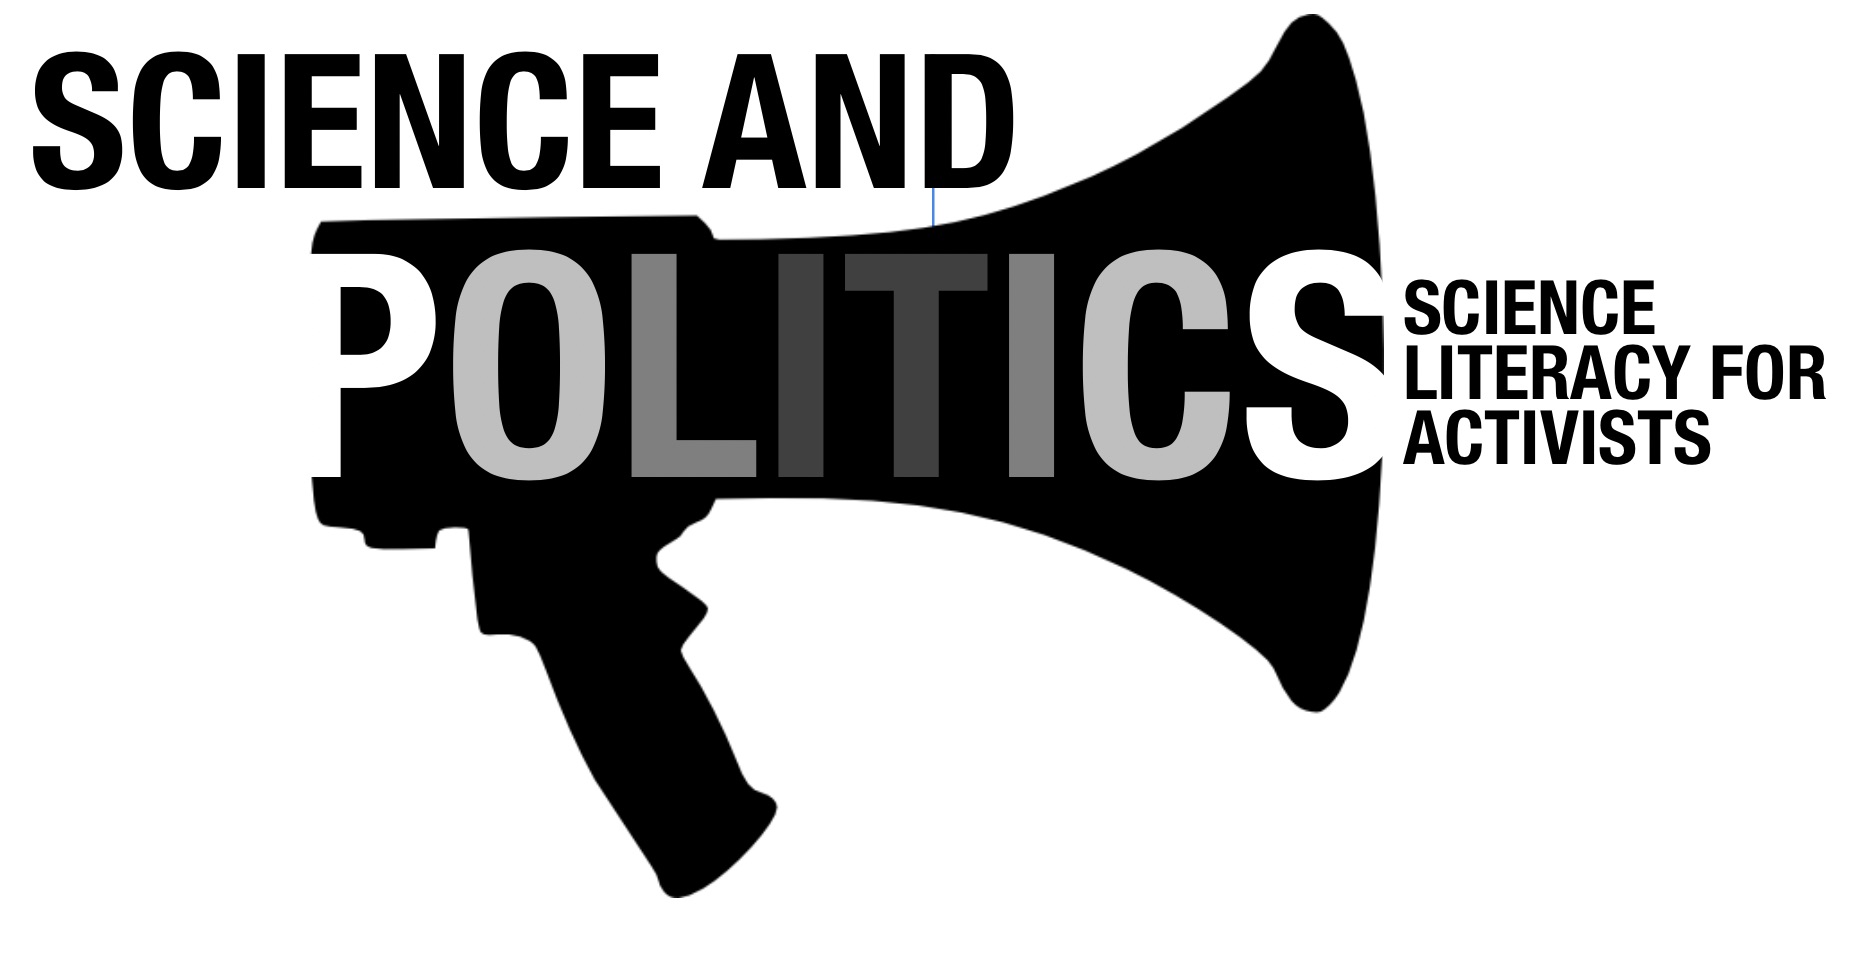 Science and Politics: Science Literacy for Activists